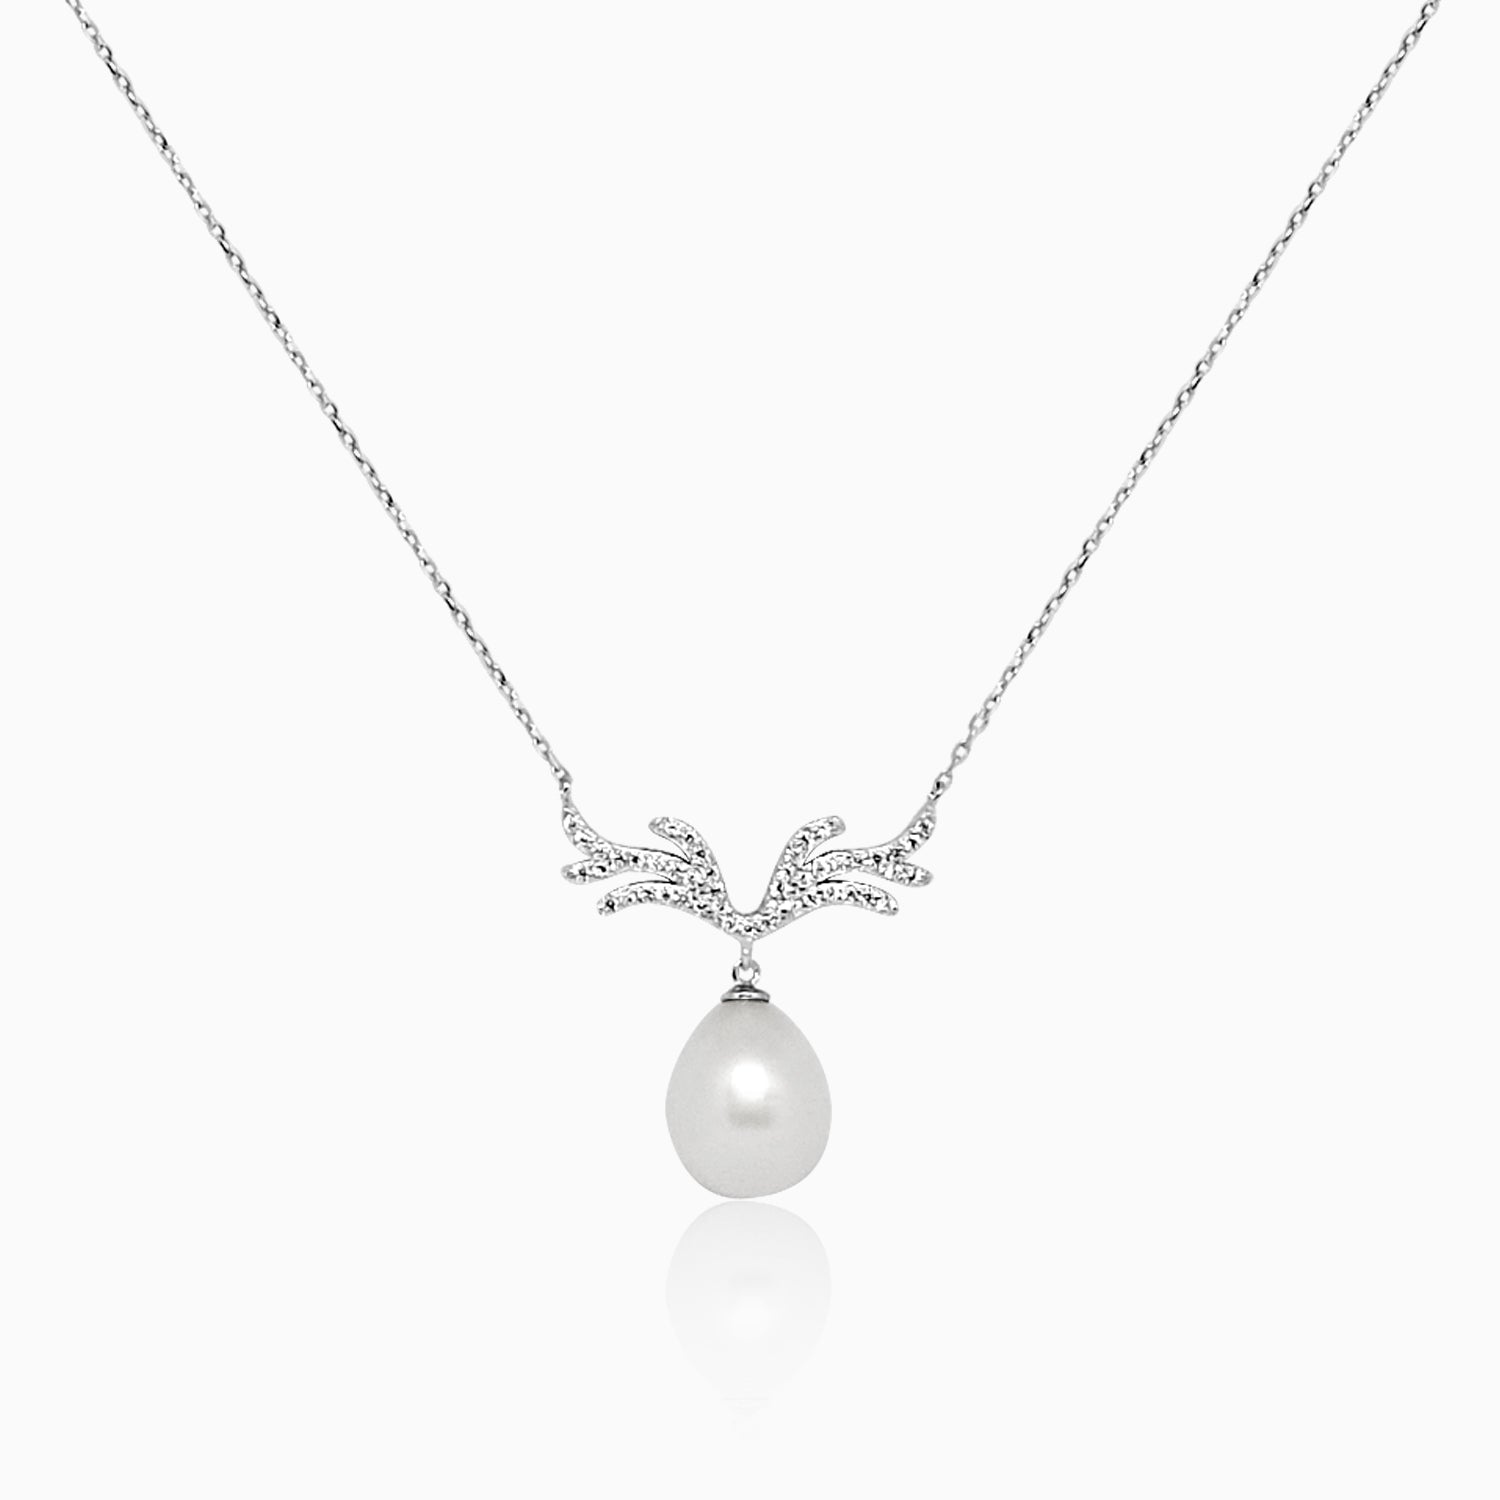 Silver Dangling Pearl Antilope Necklace